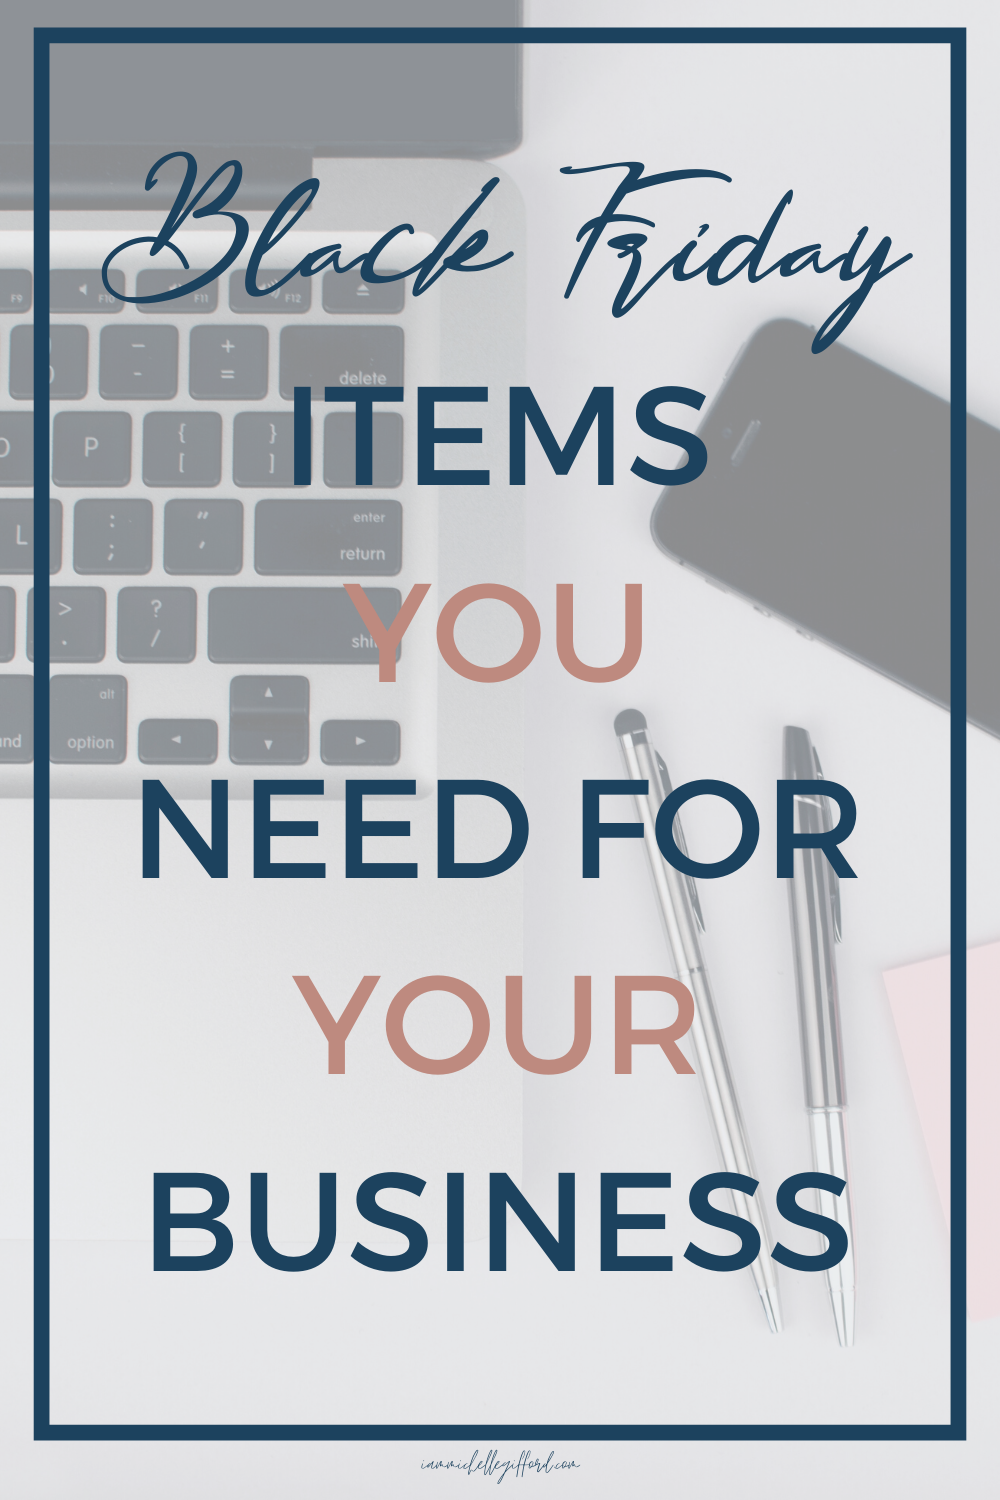 These tools will totally transform your business. The best part? These amazing deals for first time users will help you save money while you build your business on a budget. Time to get your Black Friday Business shopping on!